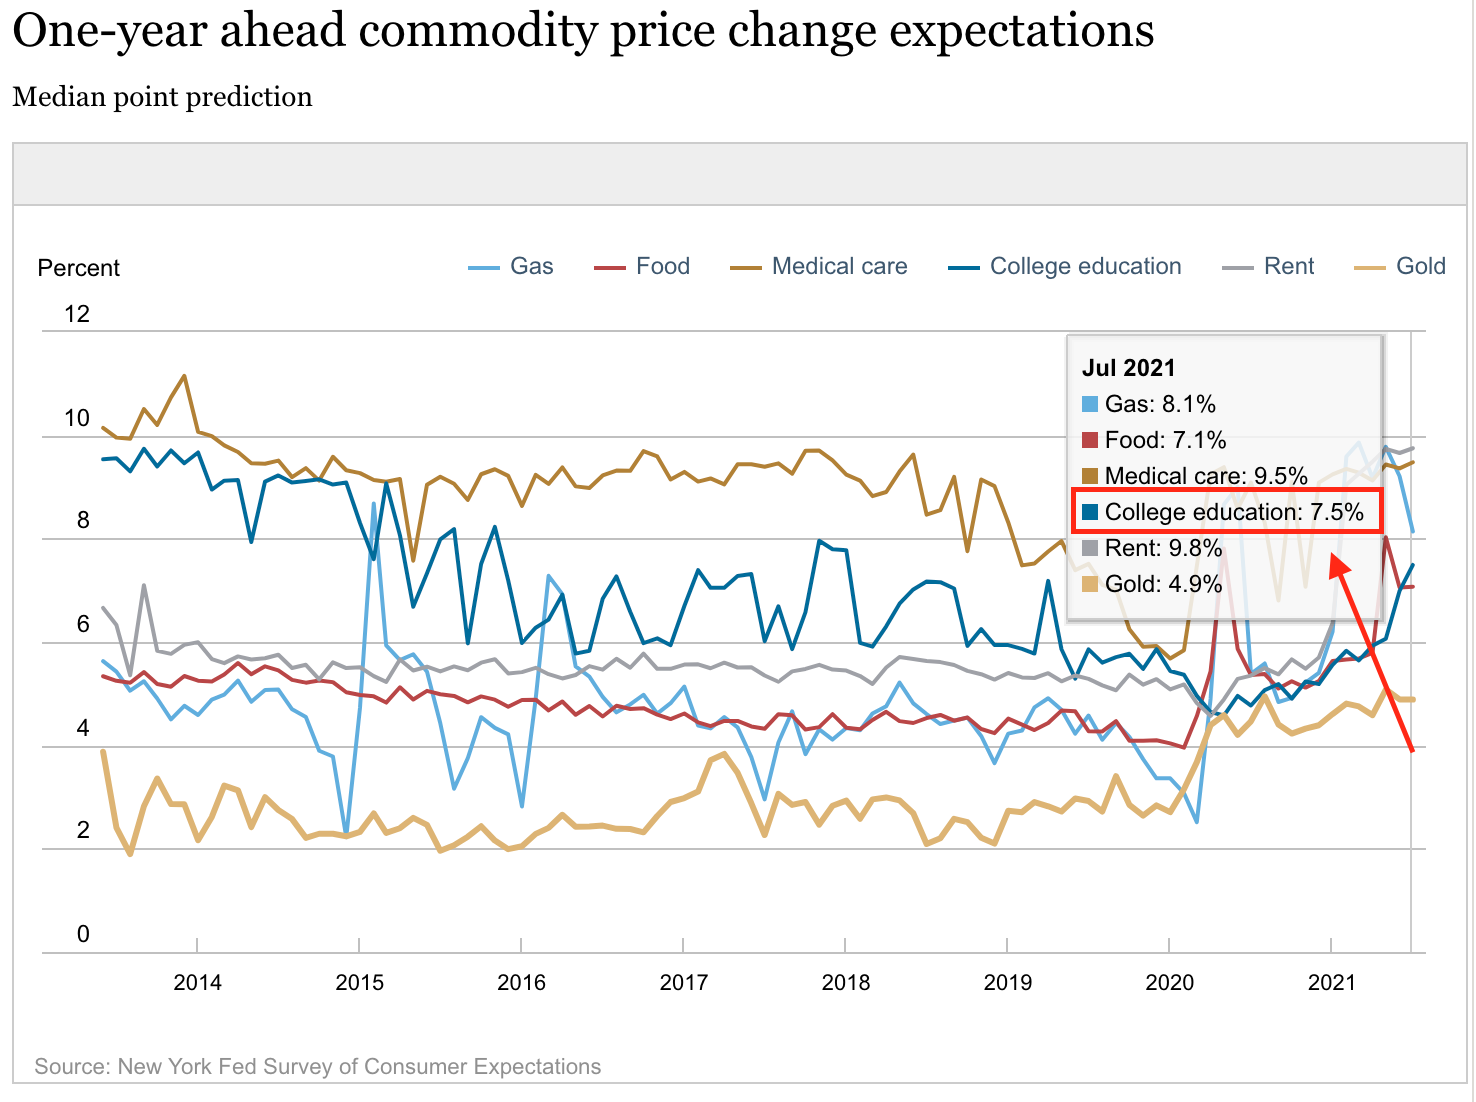 Chart: New York Federal Reserve Commodity Price Change Expectations, July 2021